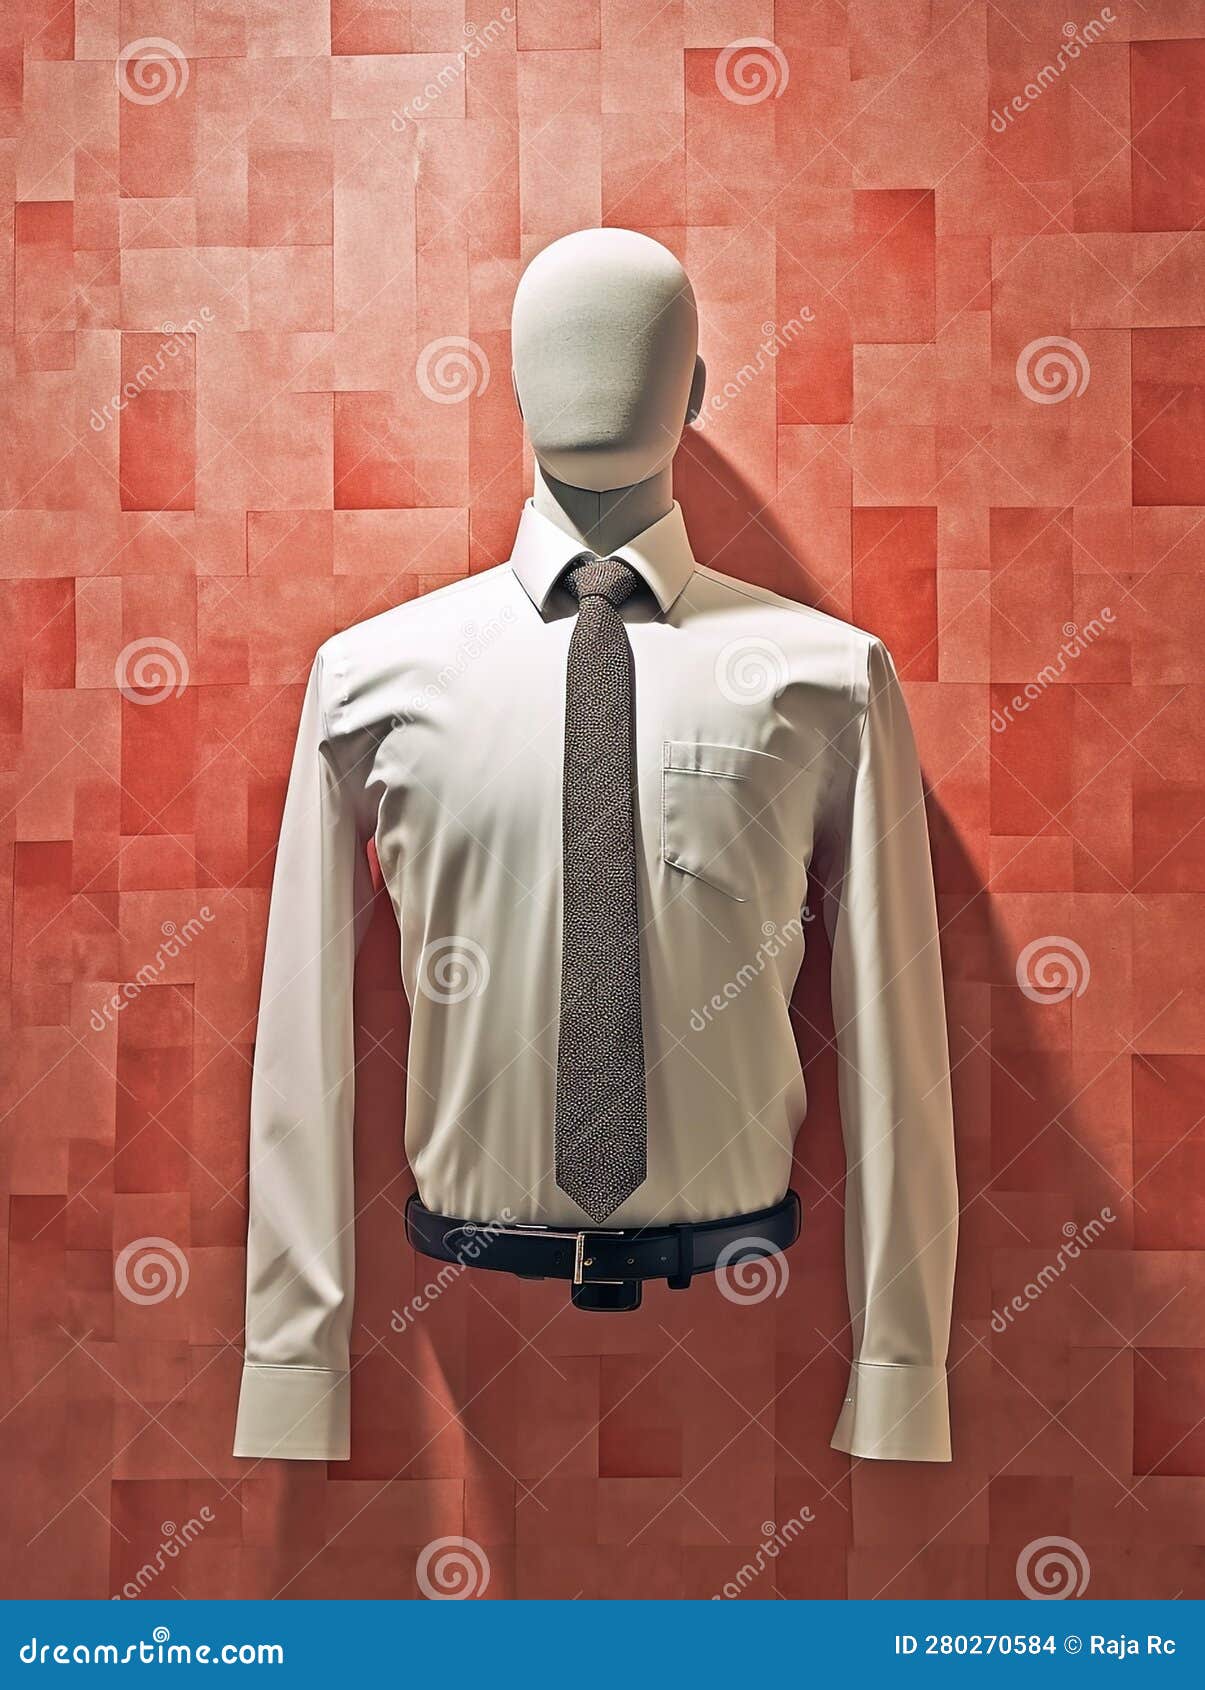 shirt for sophisticated occasions